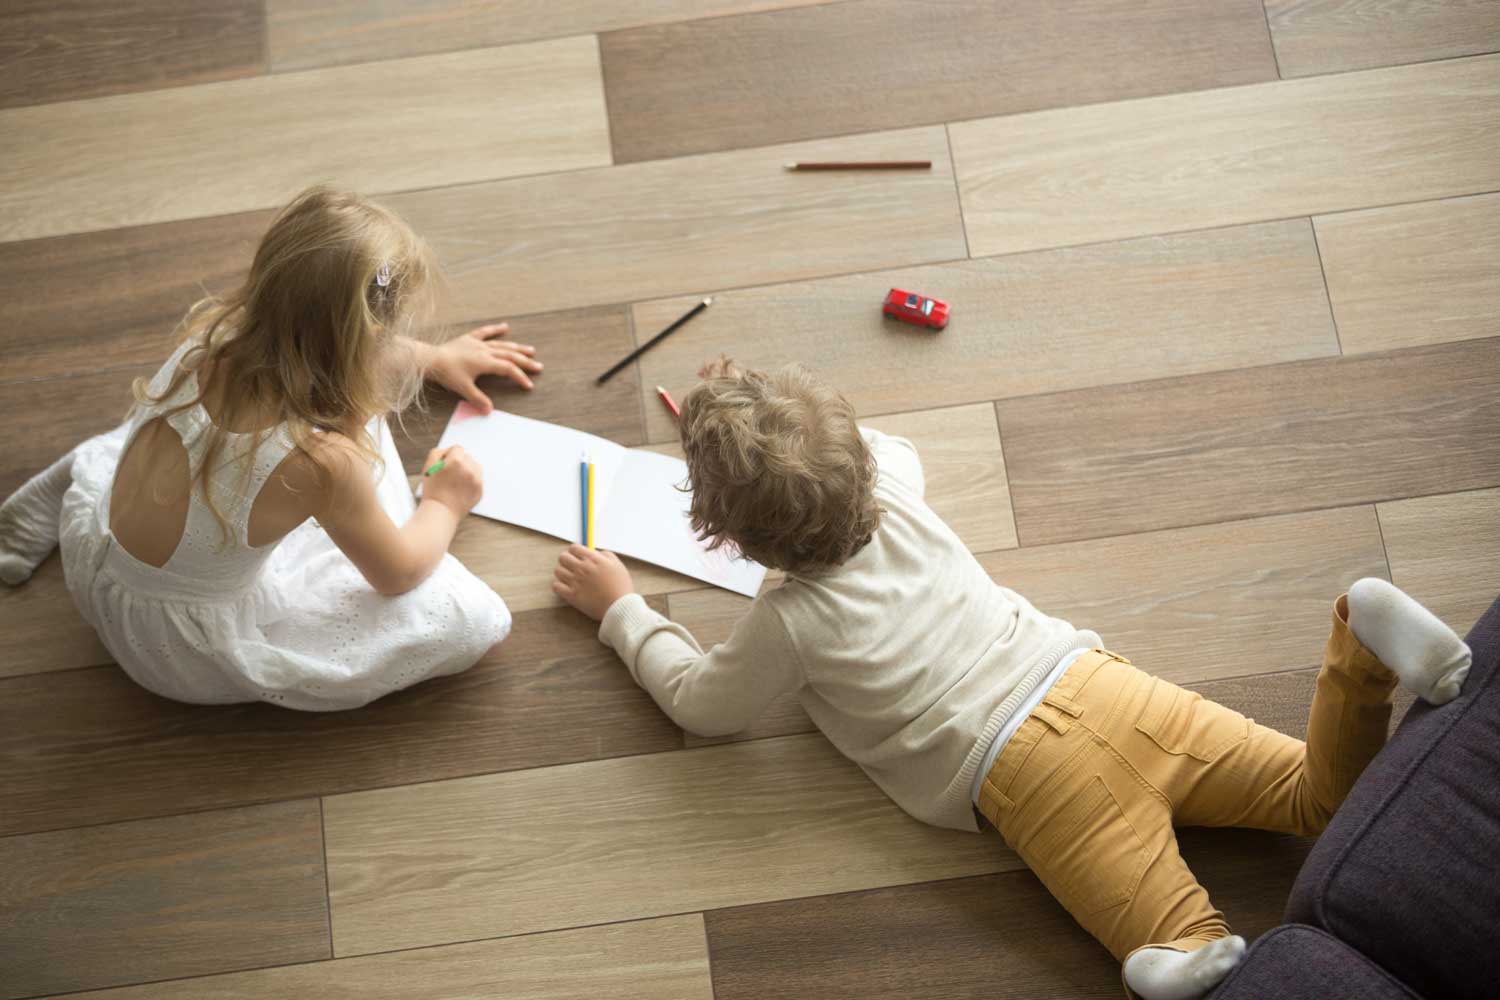 A picture of two children playing on the vinyl flooring - Footprints Floors.